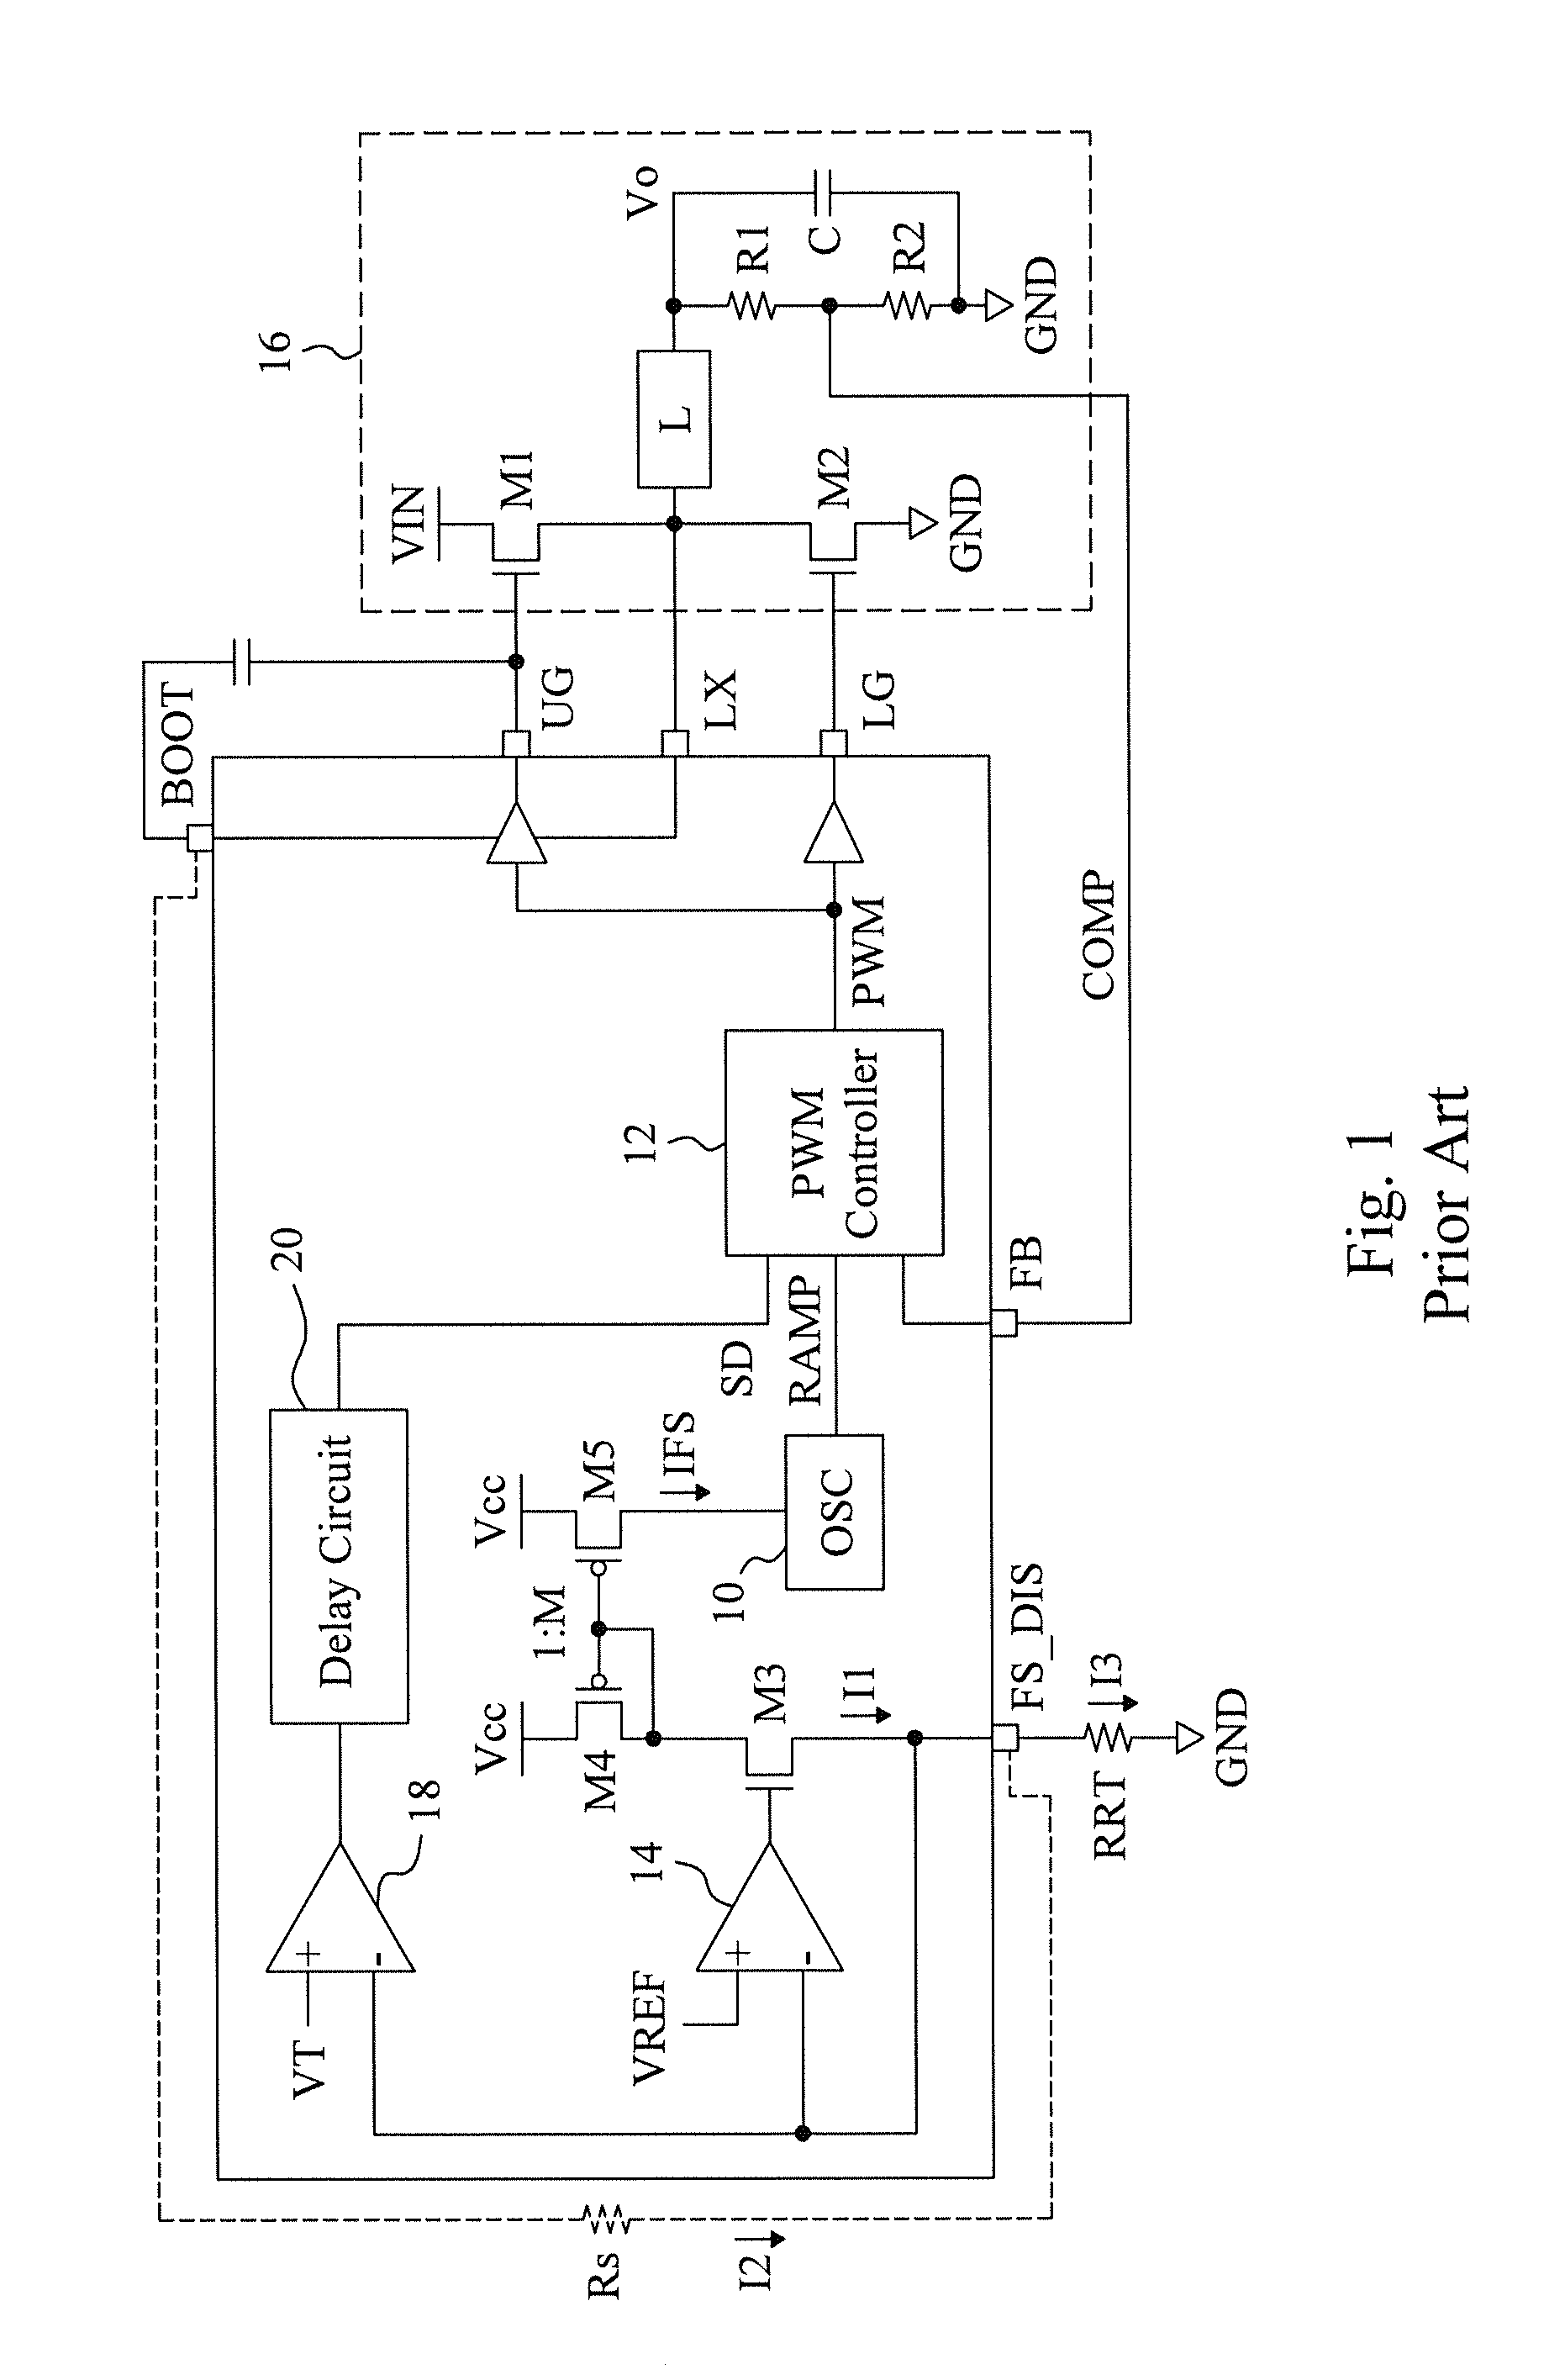 Protection to avoid abnormal operation caused by a shorted parameter setting pin of an integrated circuit